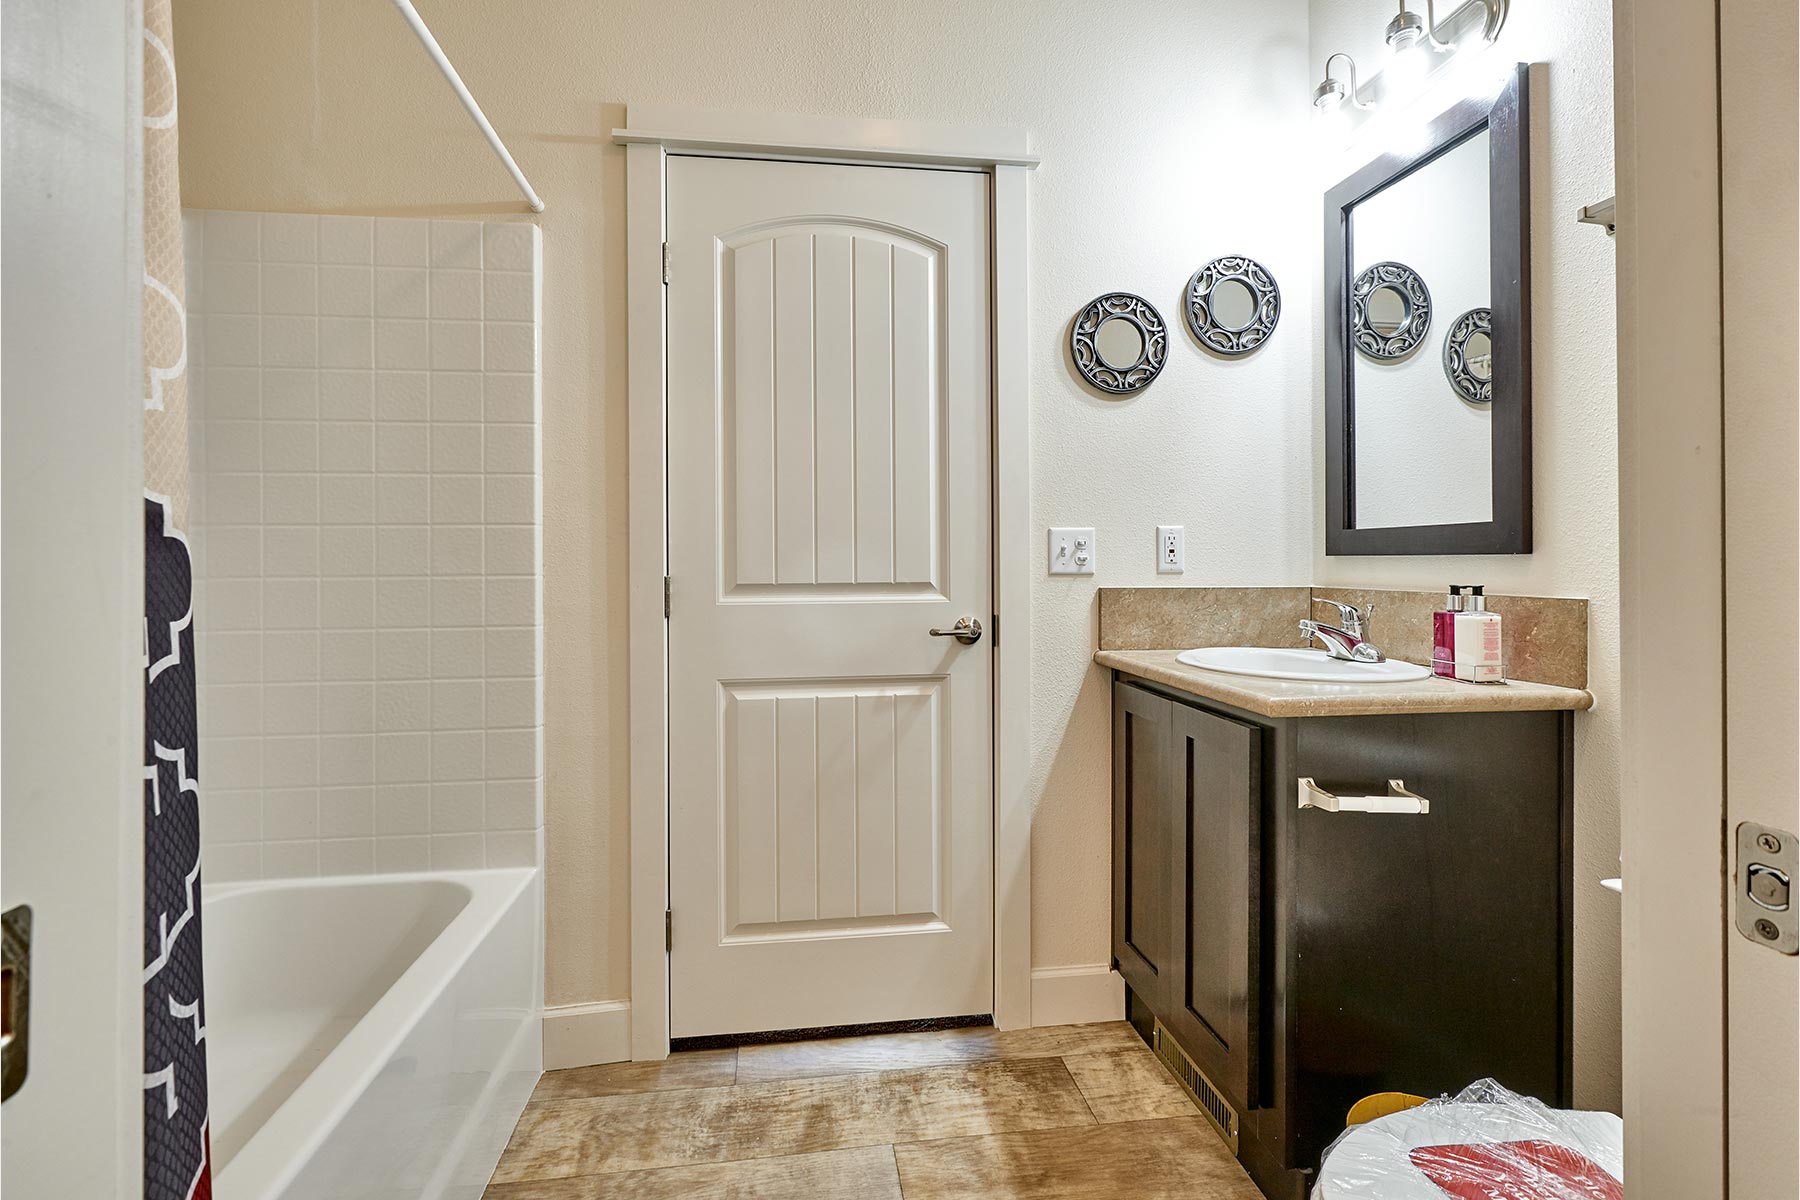 Skyline Homes Westridge 1218CT Manufactured Home Second bathroom featuring shower and vanity